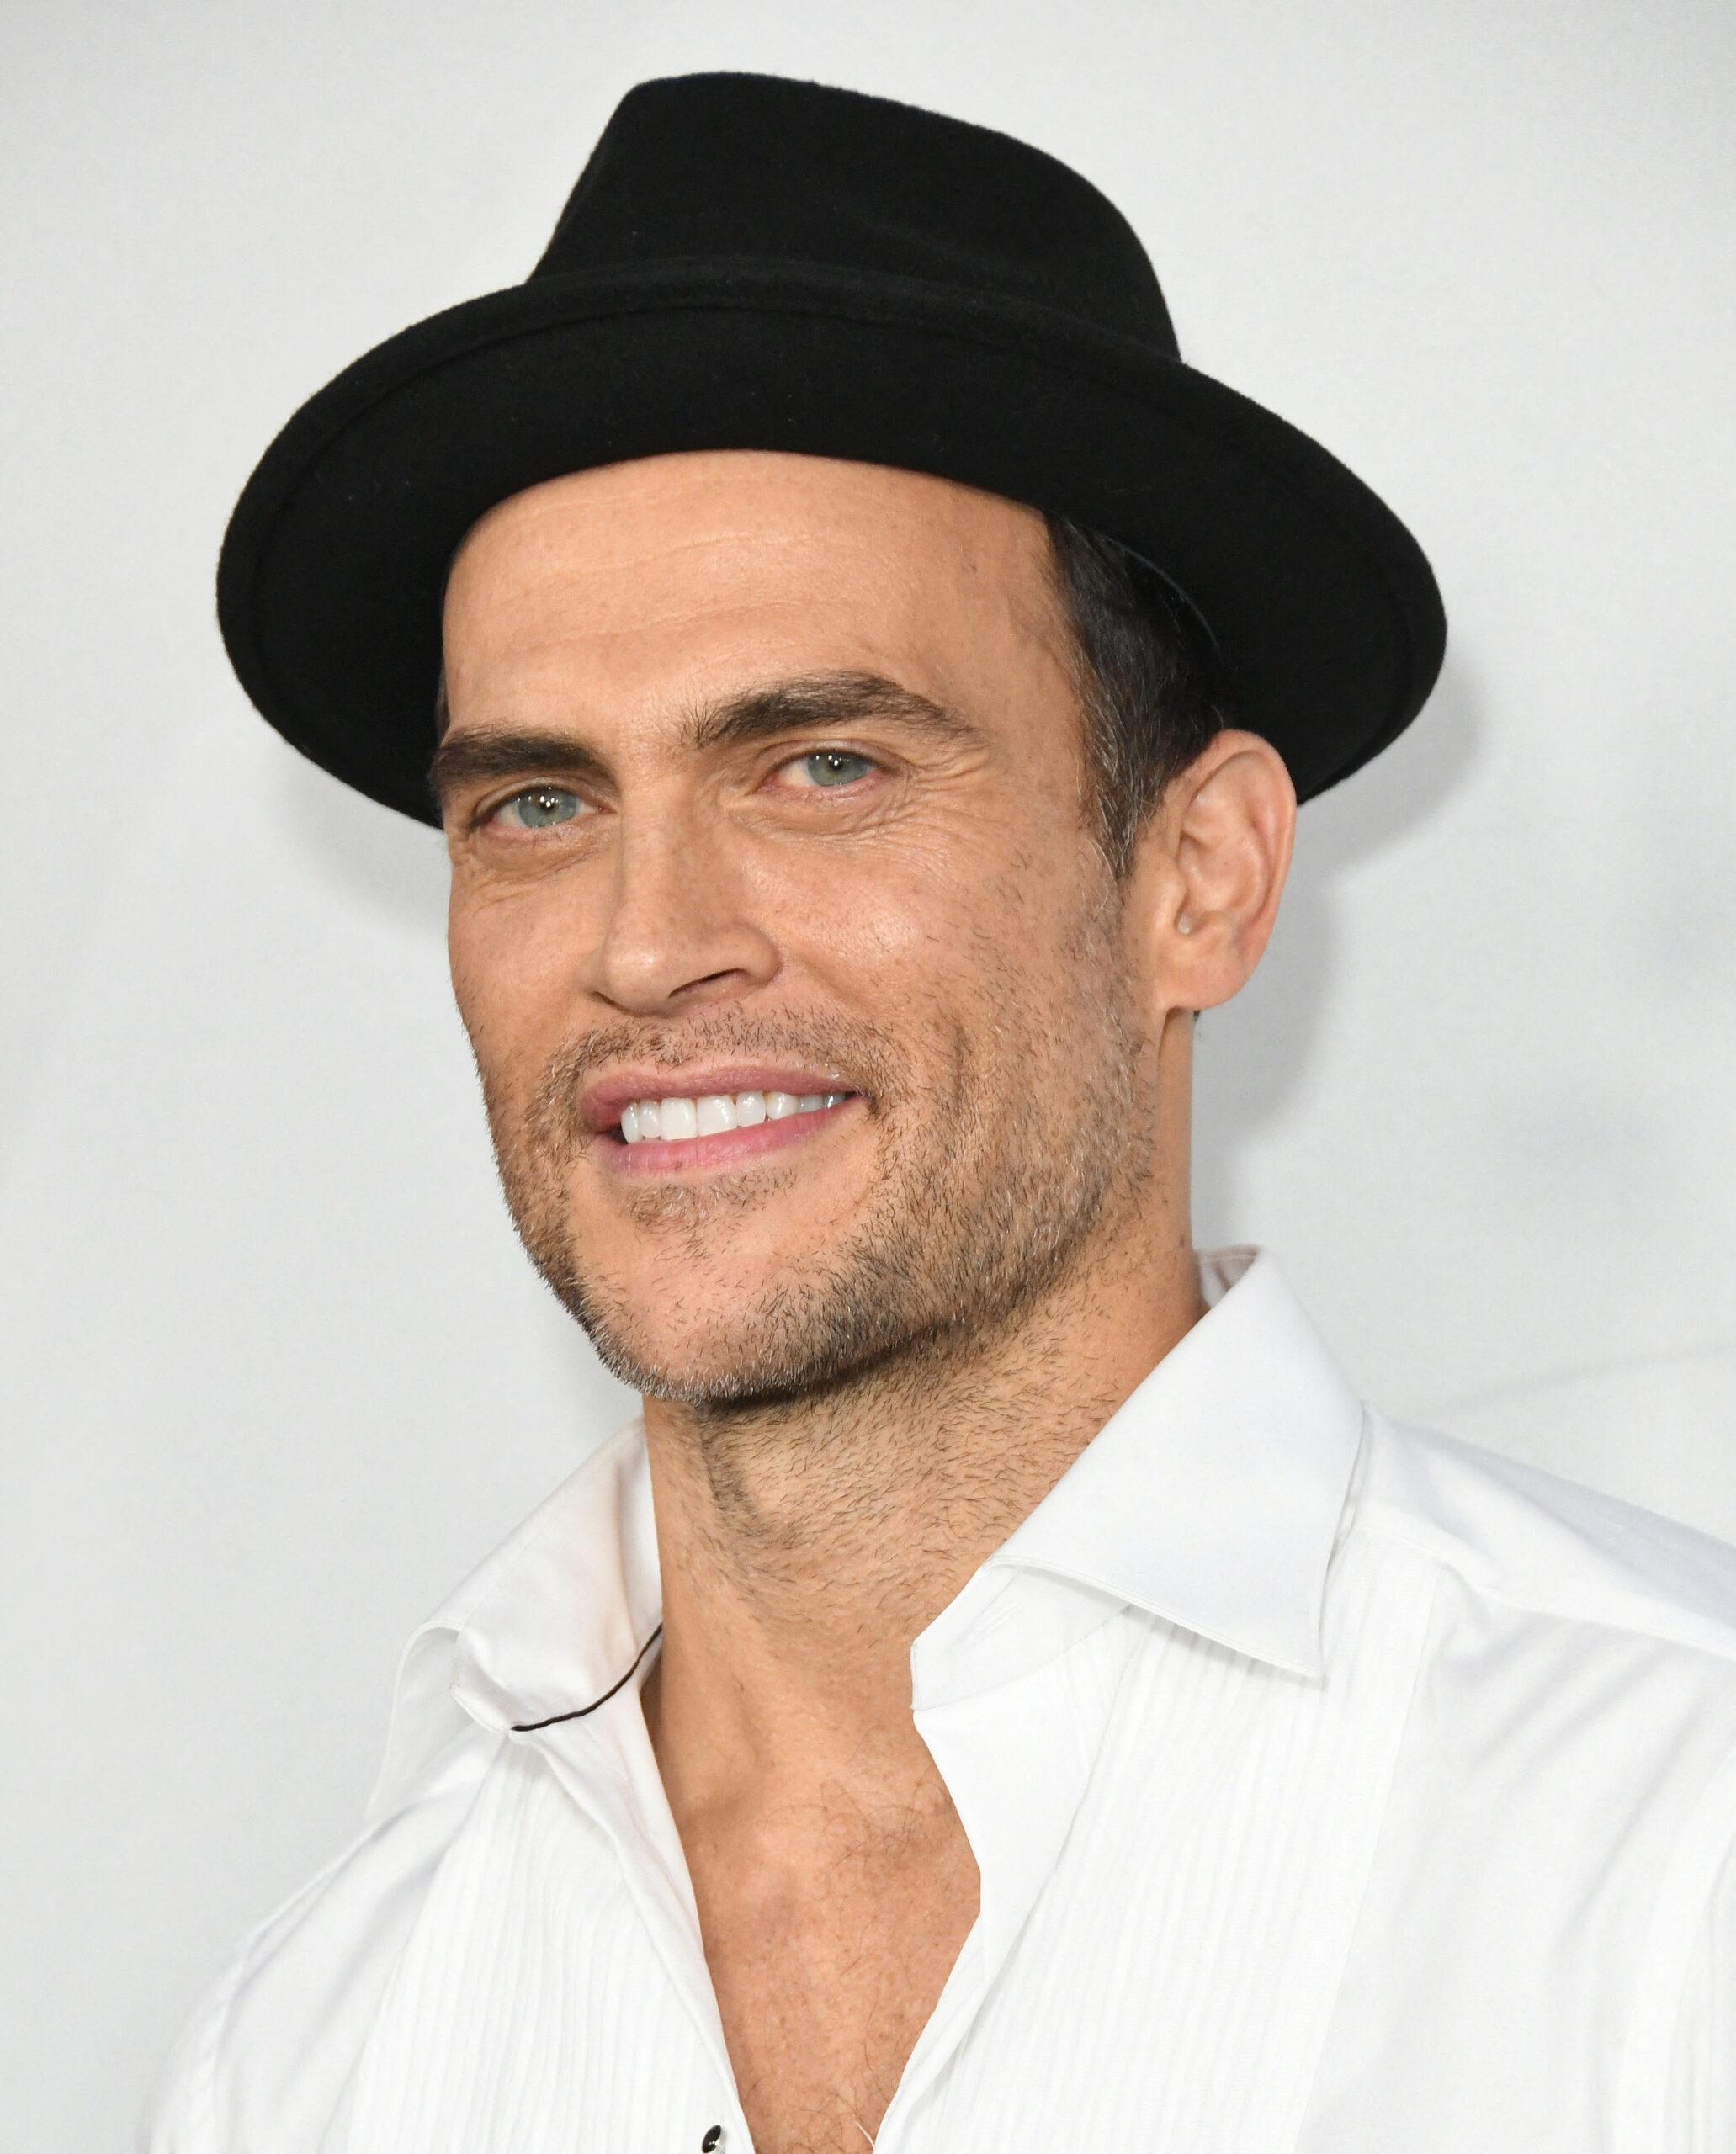 Cheyenne Jackson Admits Relapse After A Decade Of Sobriety, Opens Up About Struggle With Alcohol